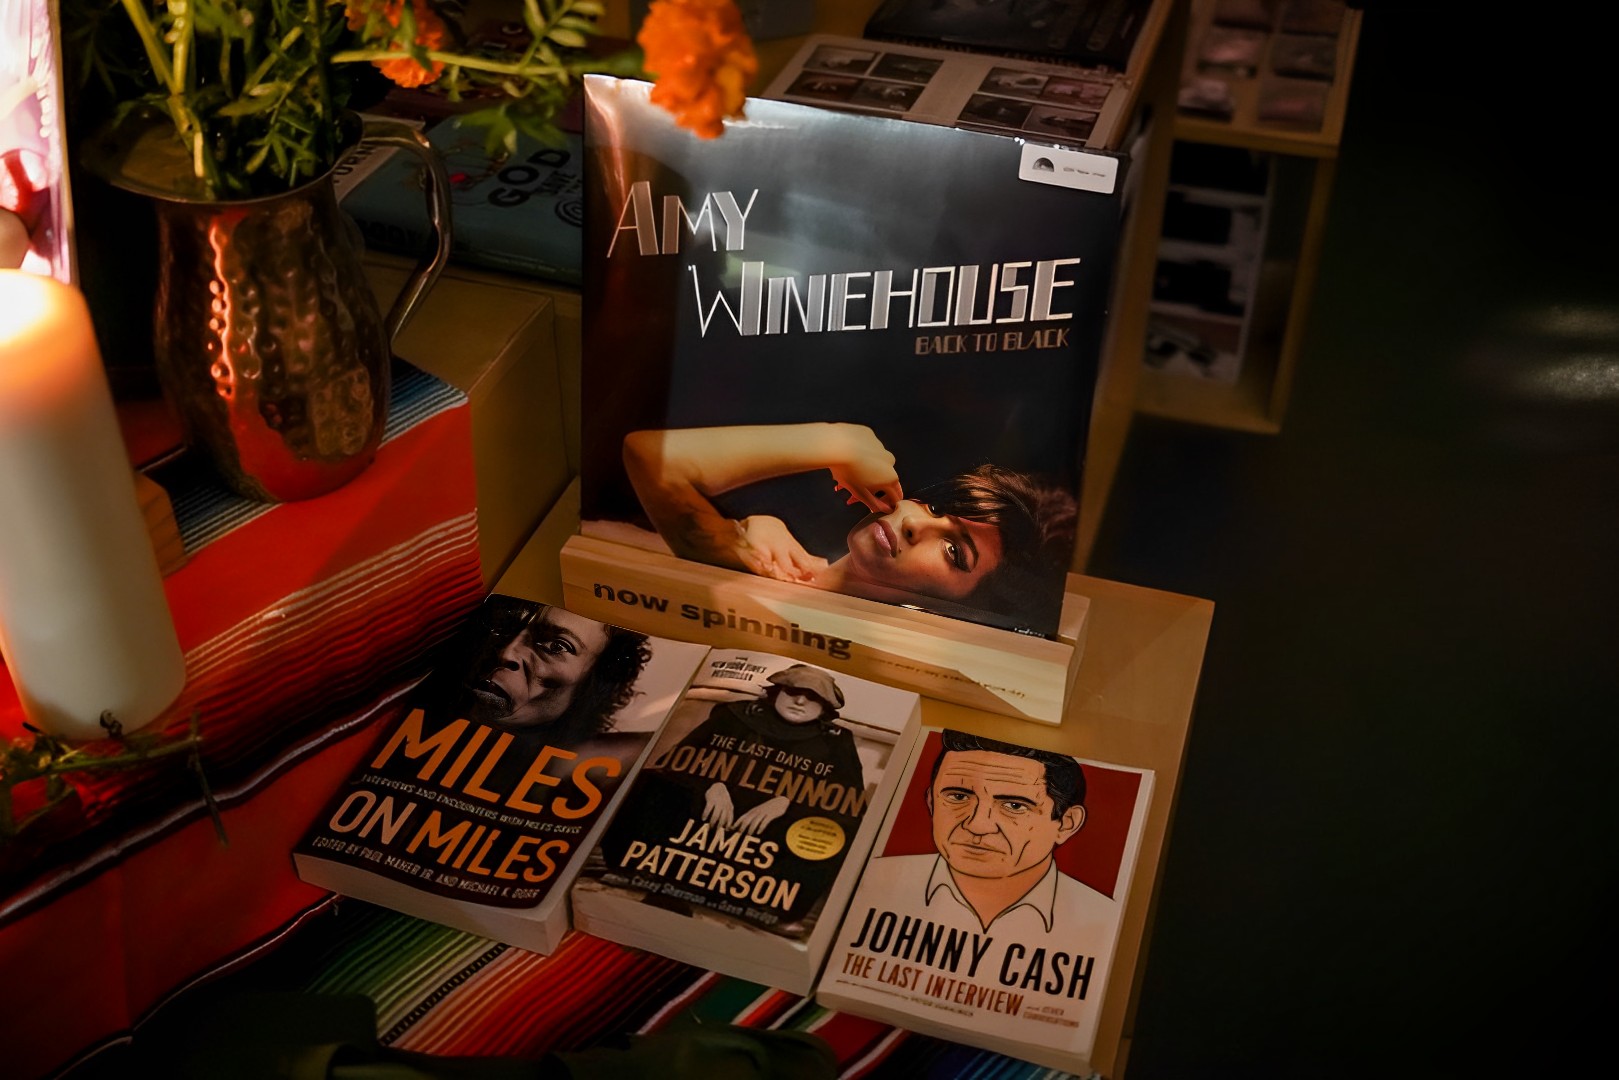 An Amy Winehouse vinyl record and 3 biographical books on Miles Davis, John Lennon and Johnny Cash